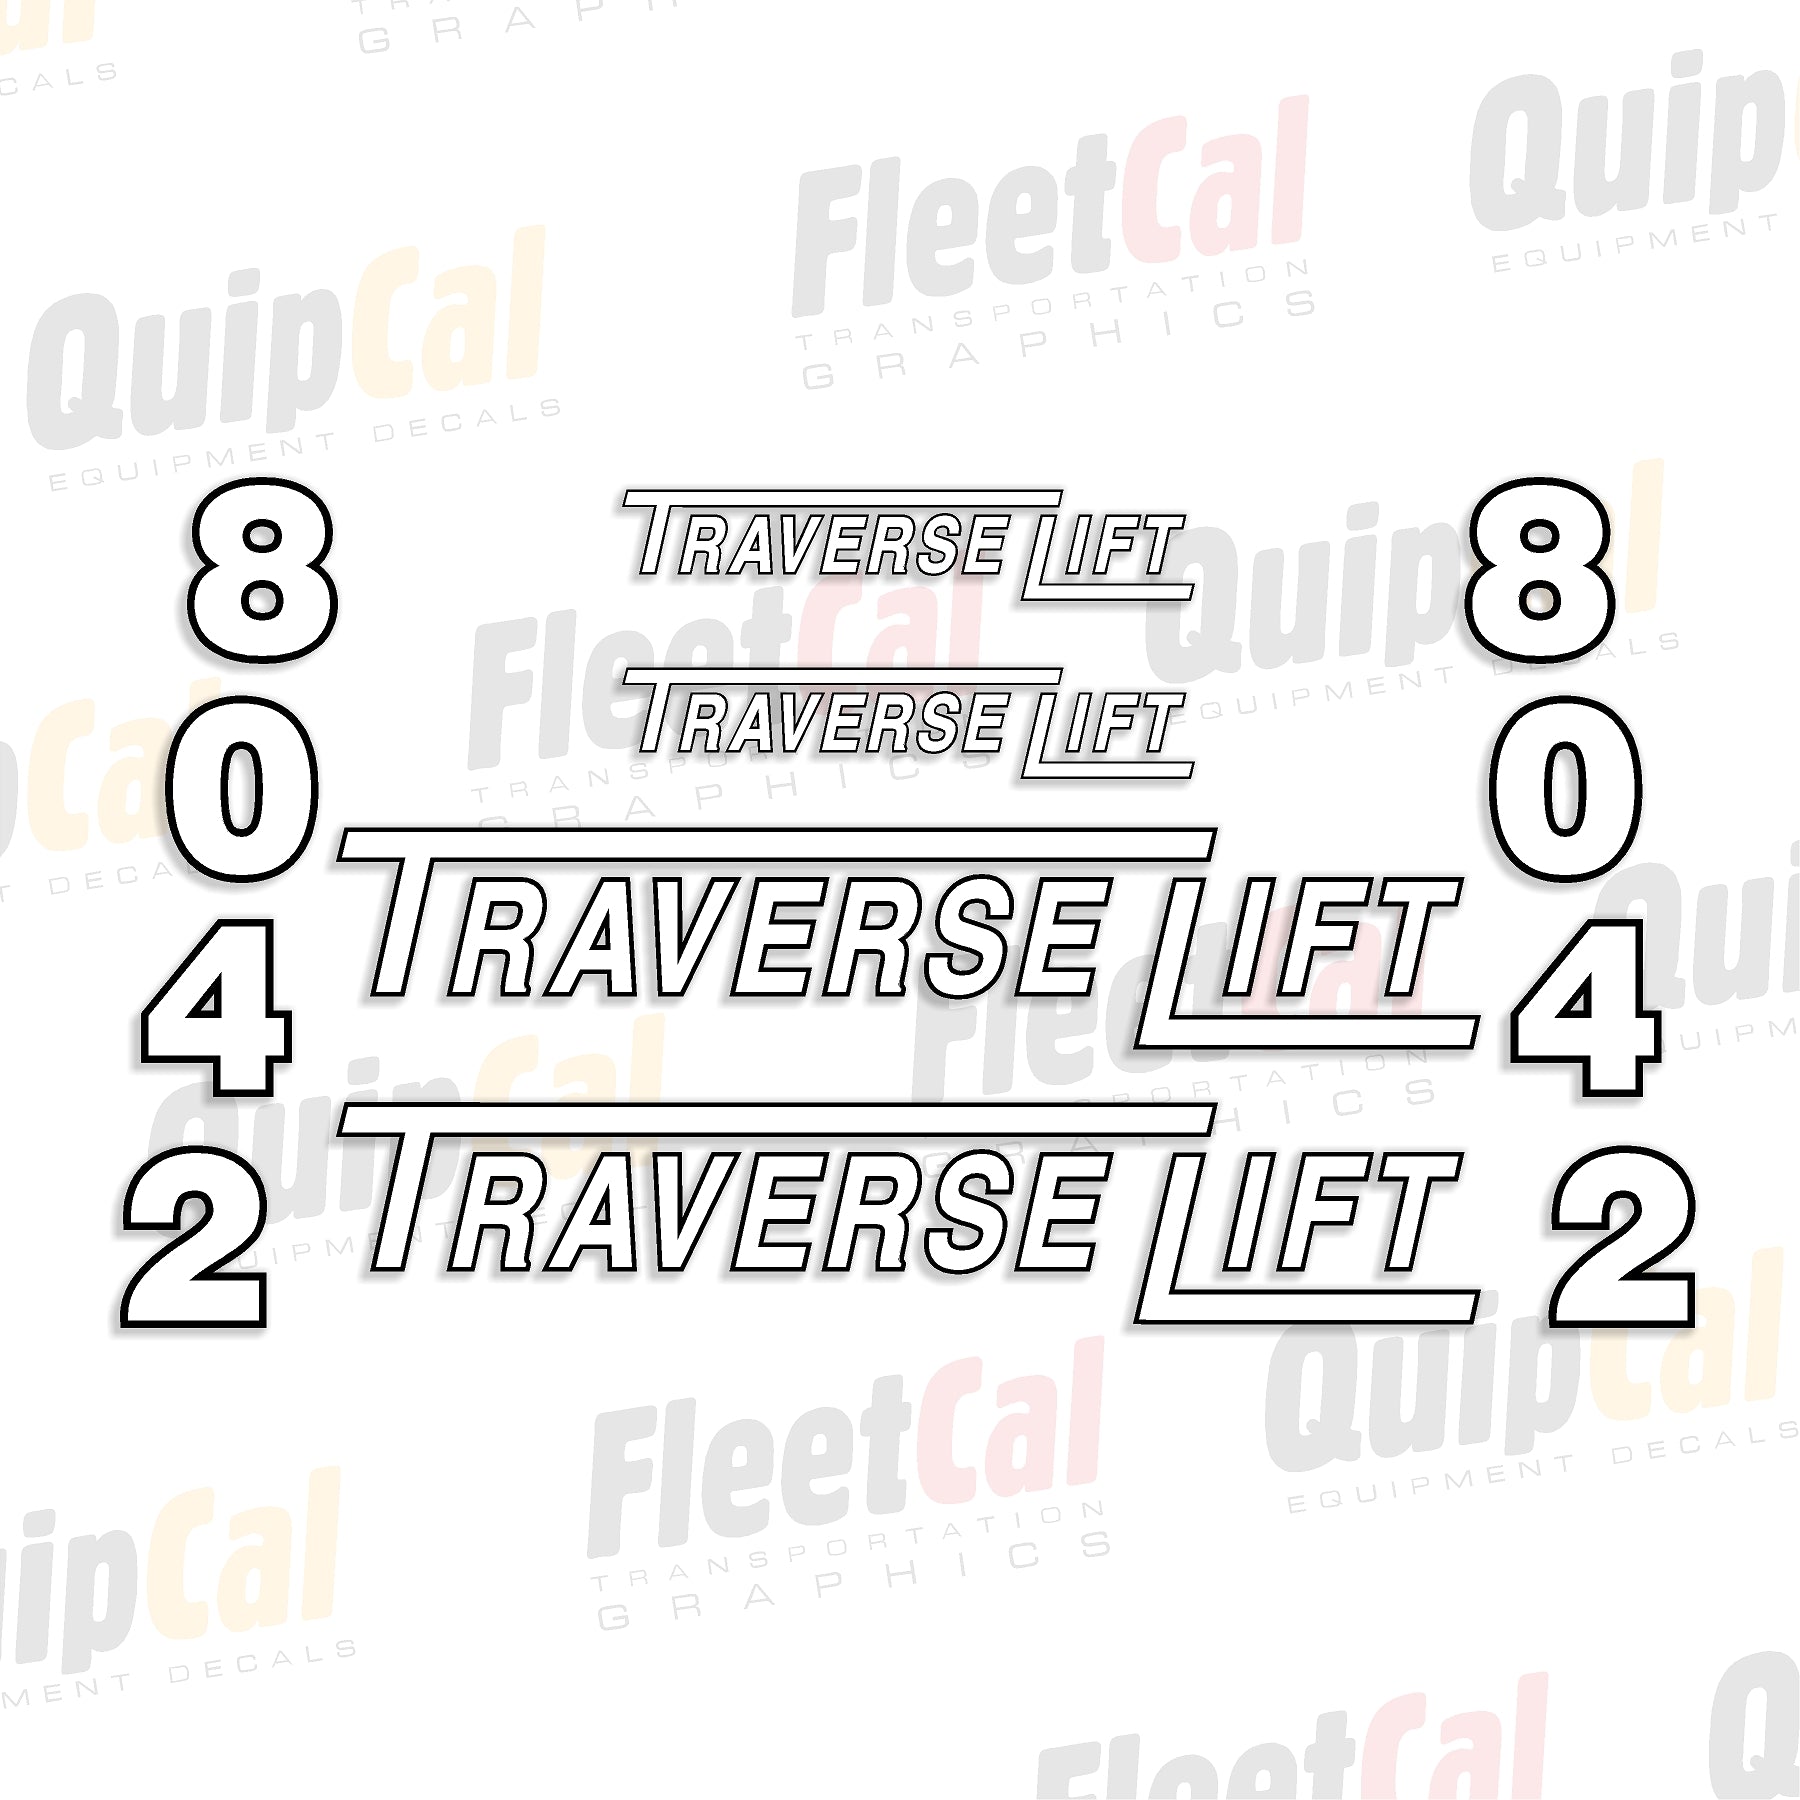 Decals for Traverse Lift Telehandlers